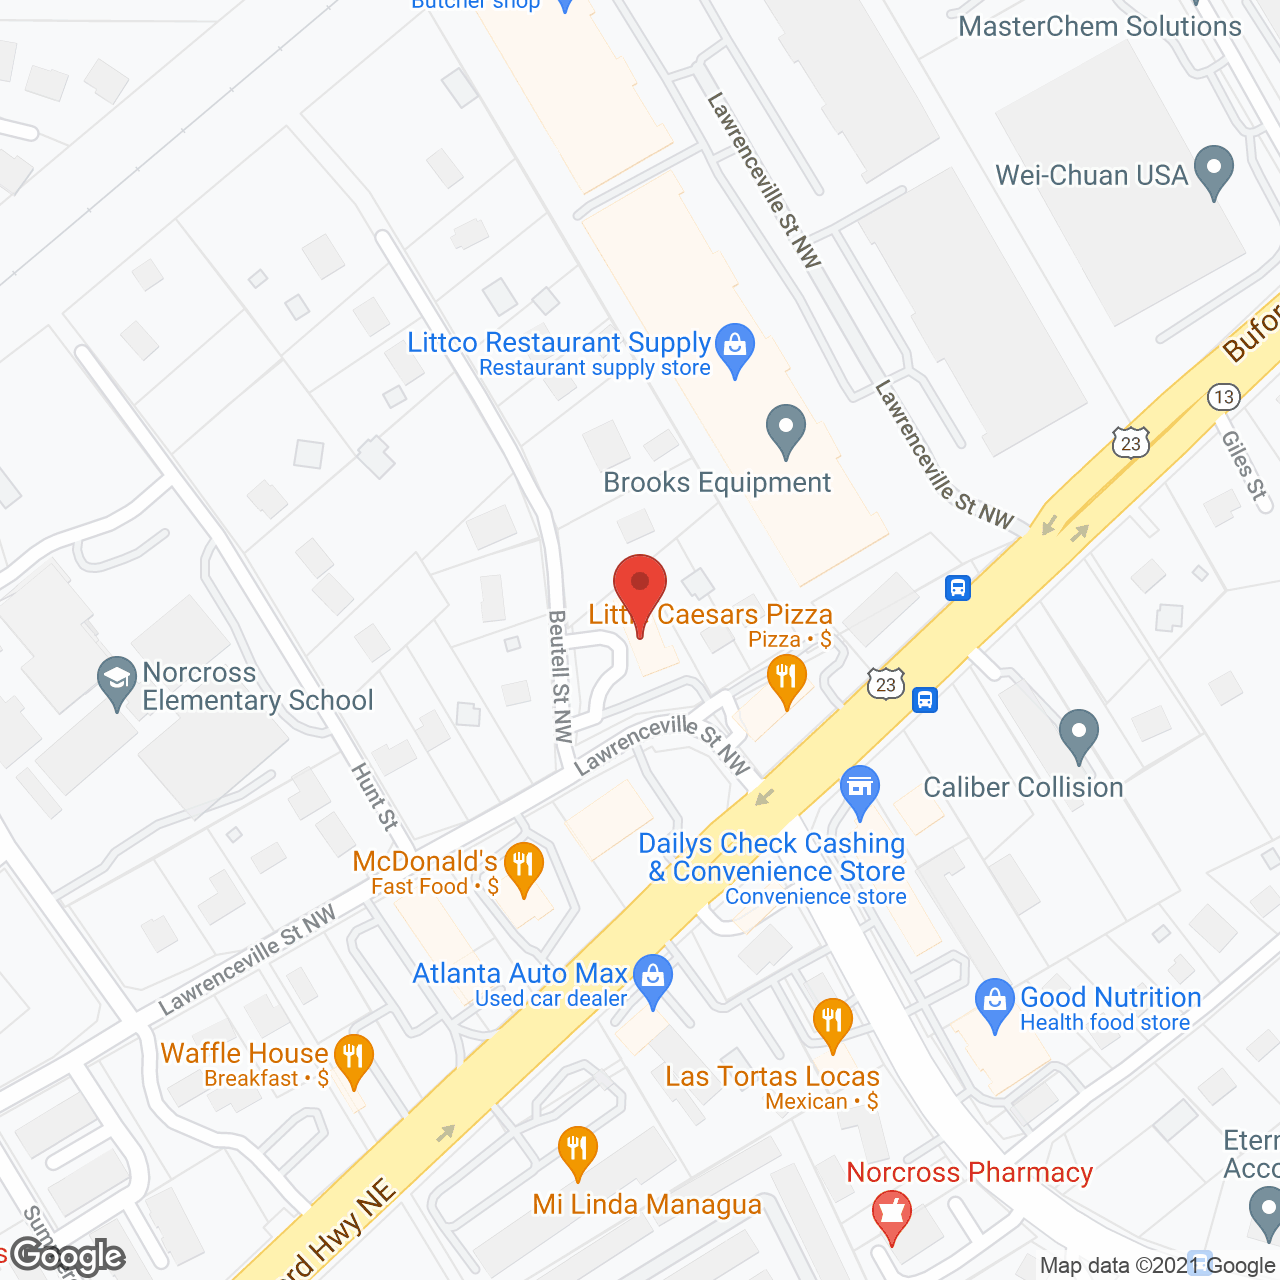 Enrich at 519 in google map